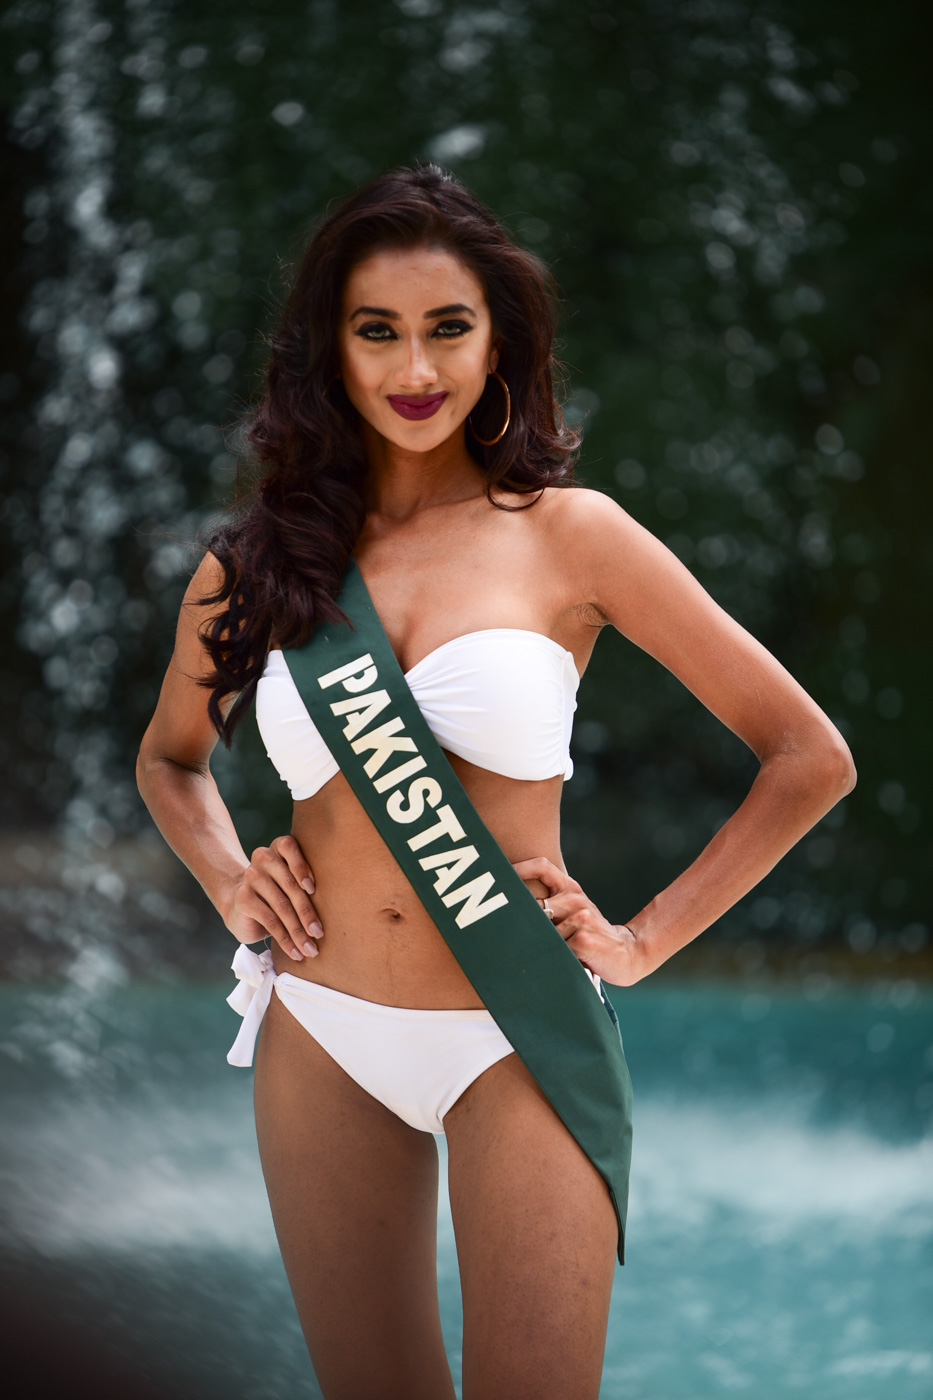 IN PHOTOS: Meet the candidates of Miss Earth 2017.